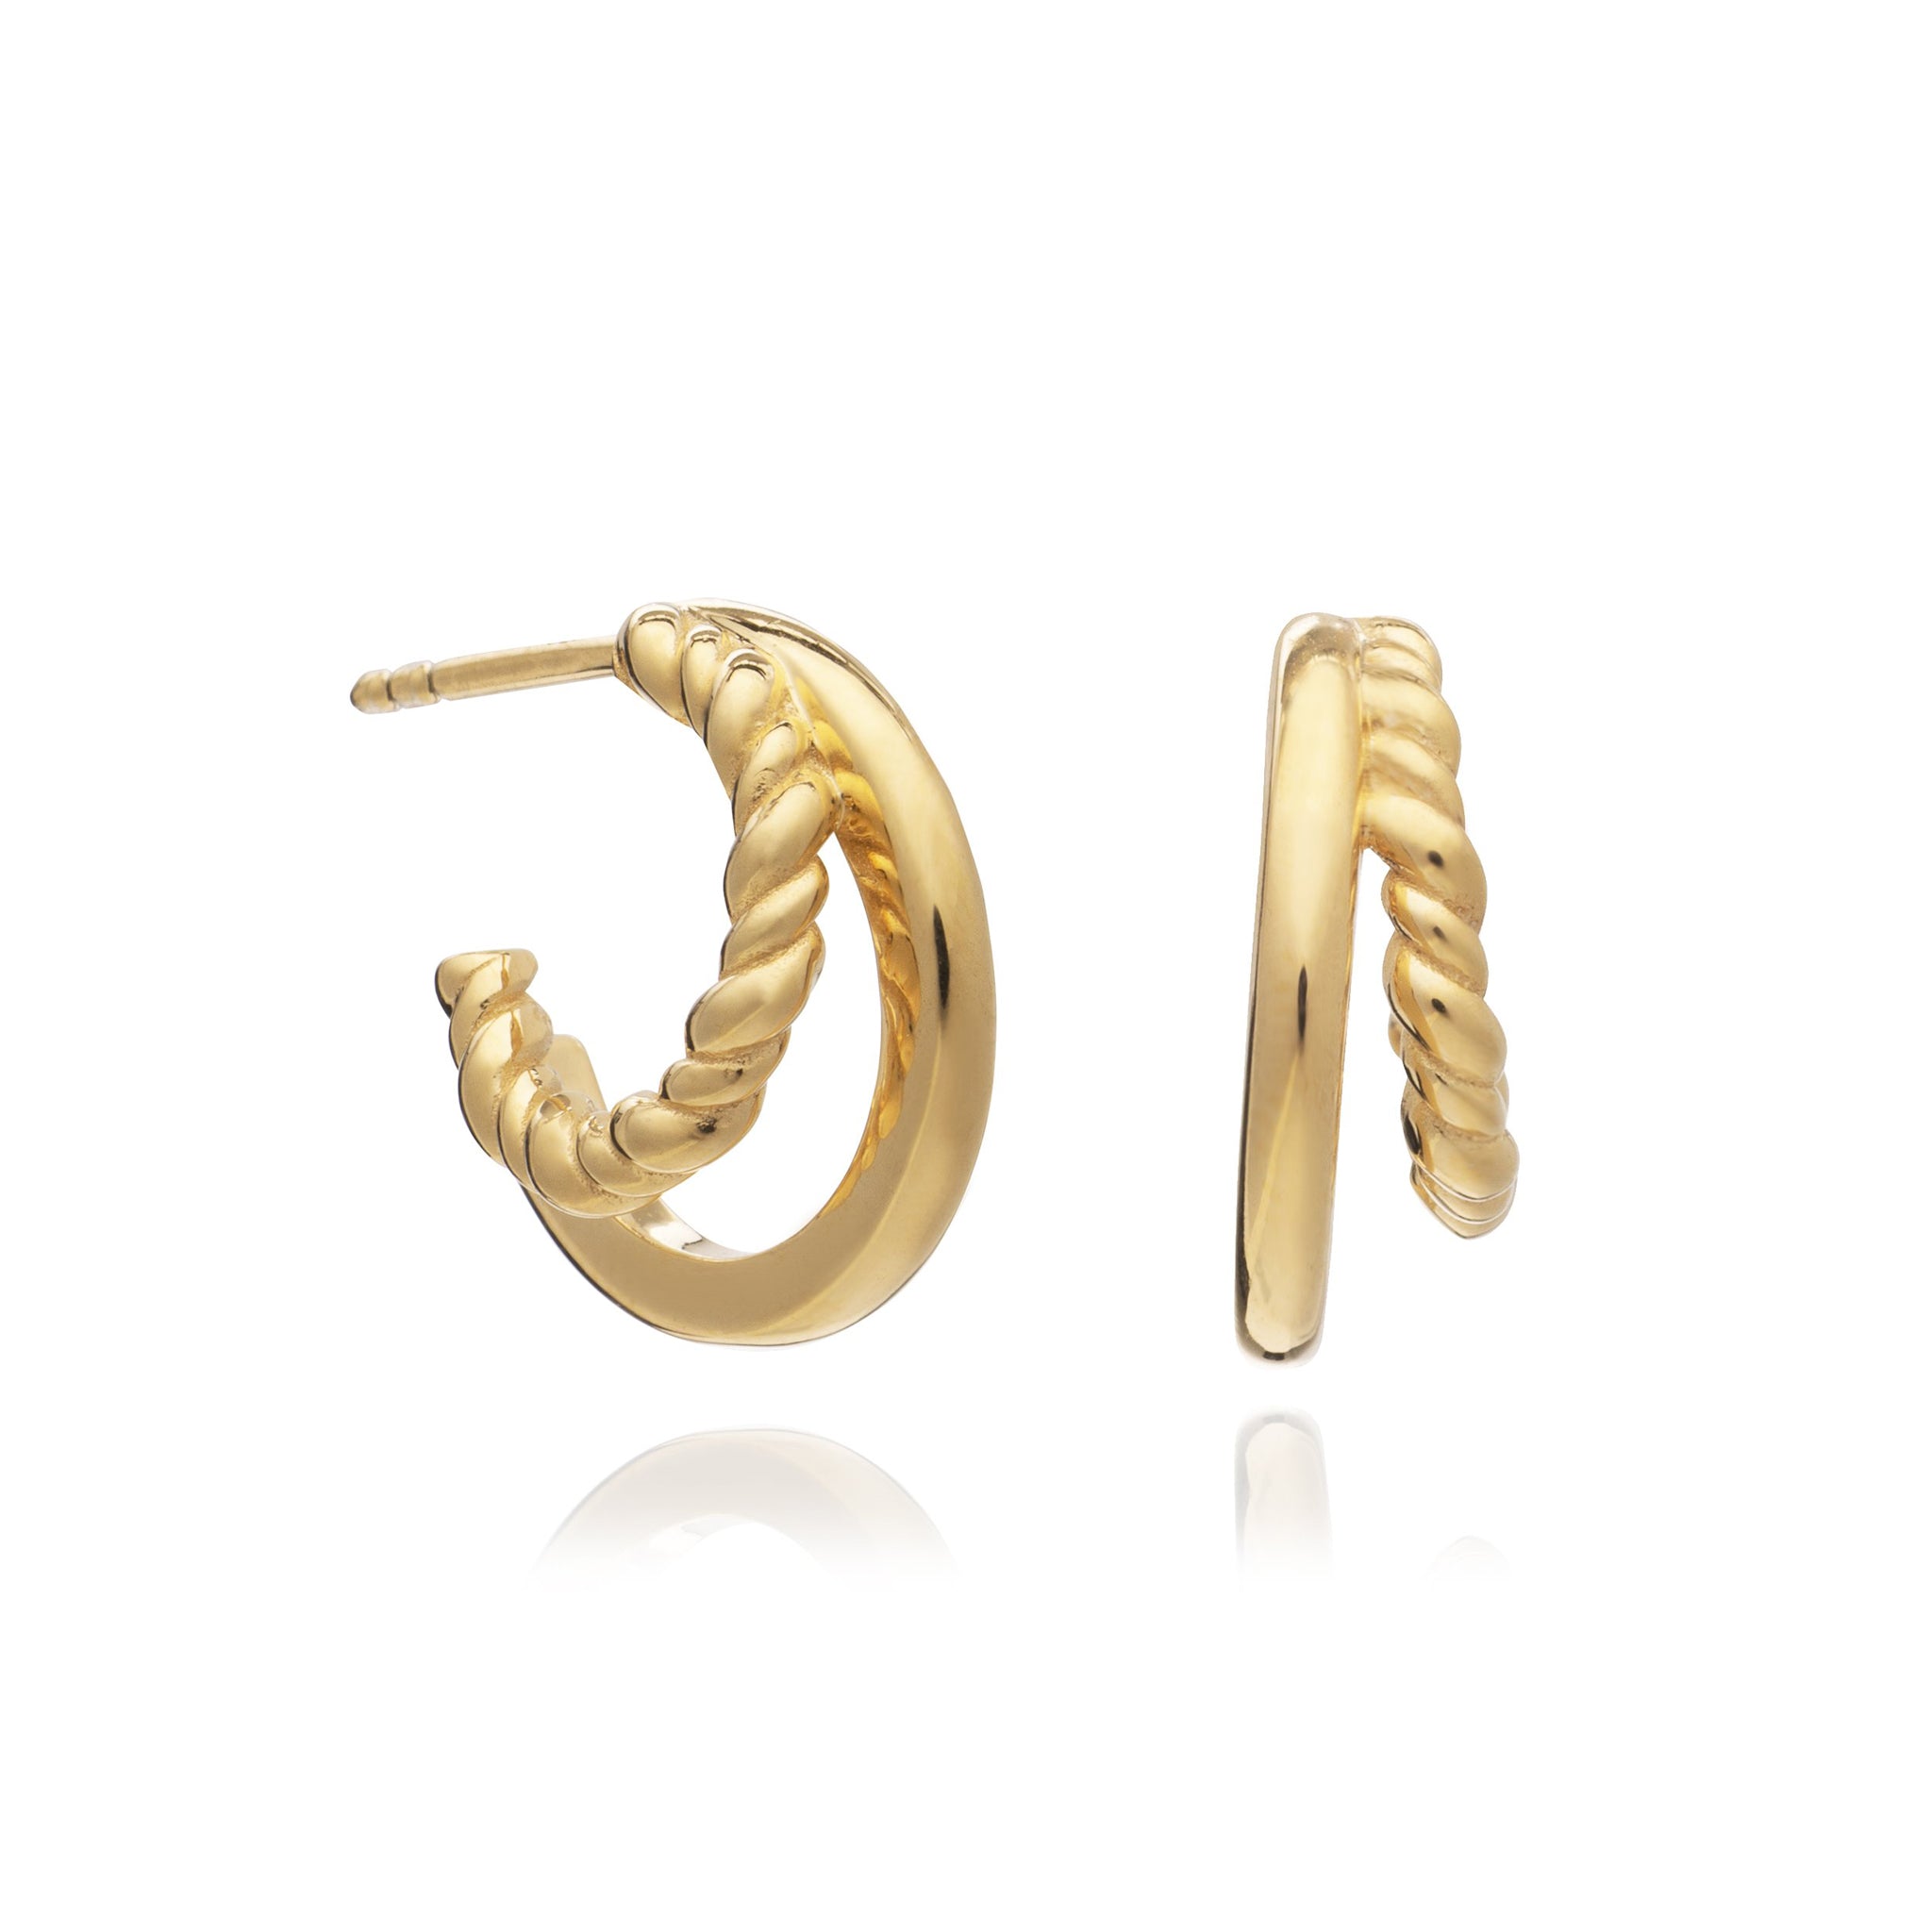 A pair of Illusion Huggie Hoops - Gold by Rachel Jackson London, perfect for stacking in a jewellery box.